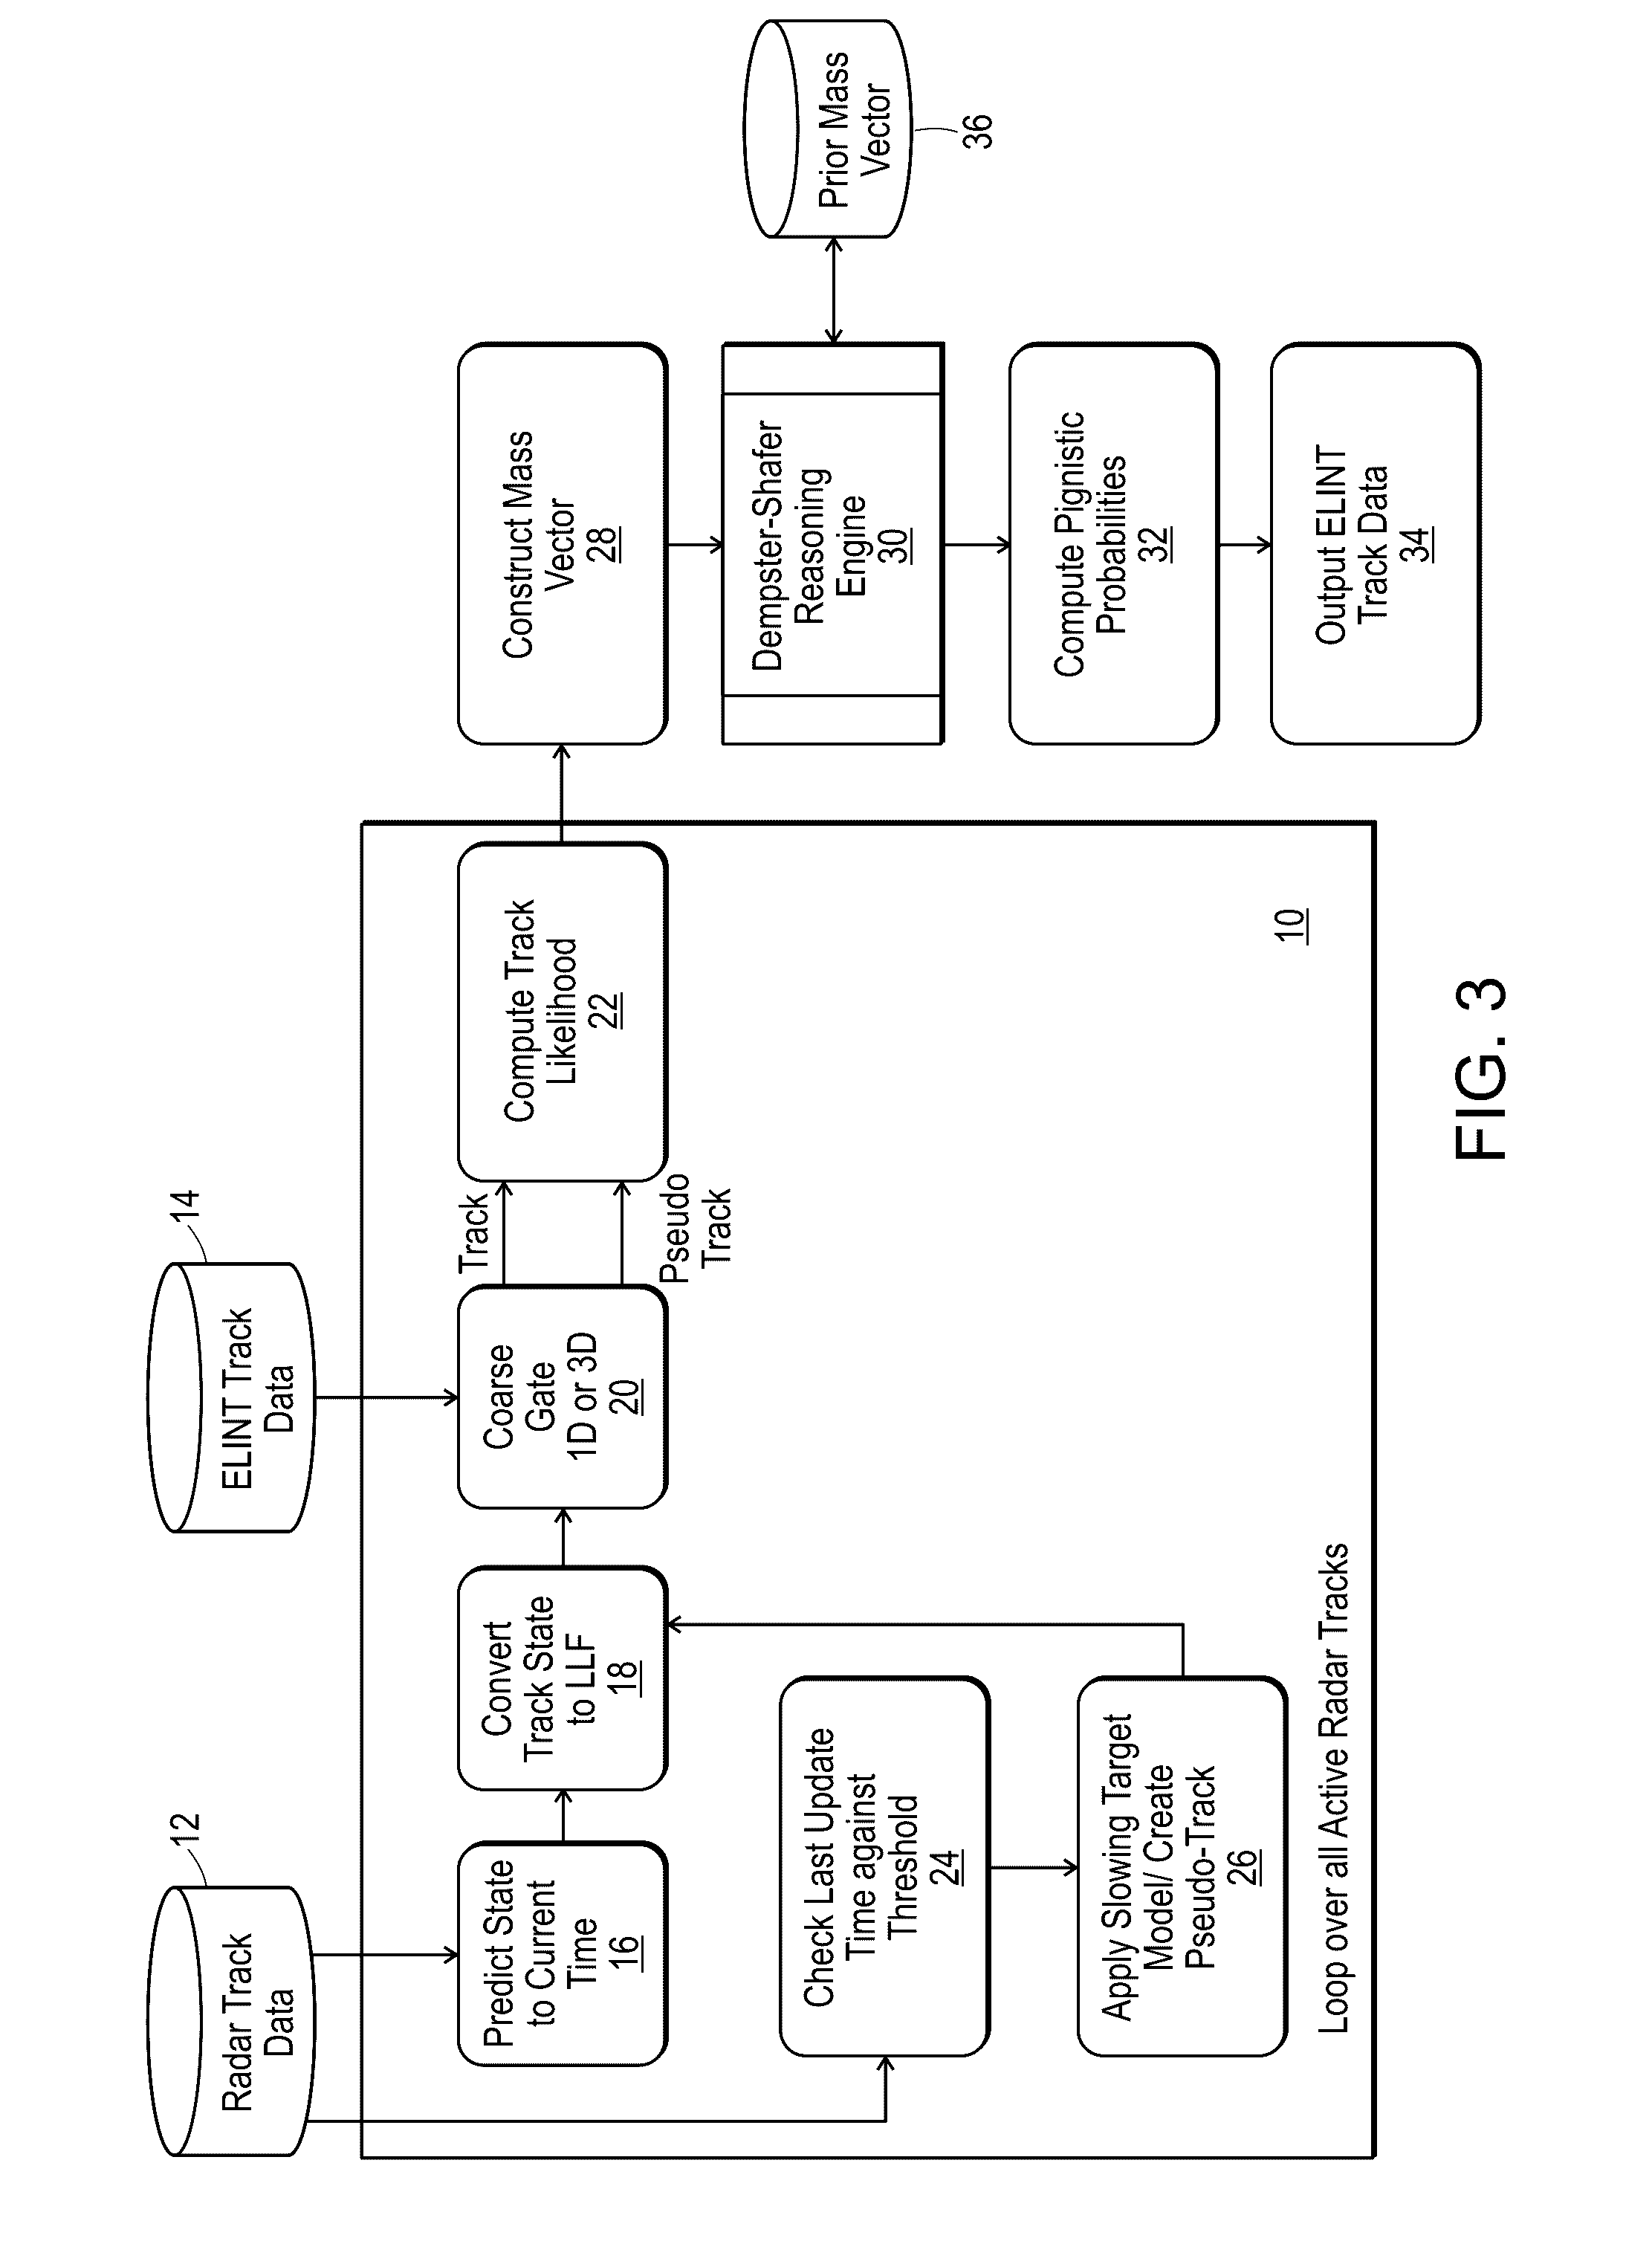 Apparatus and method for processing electronic intelligence (ELINT) and radar tracking data